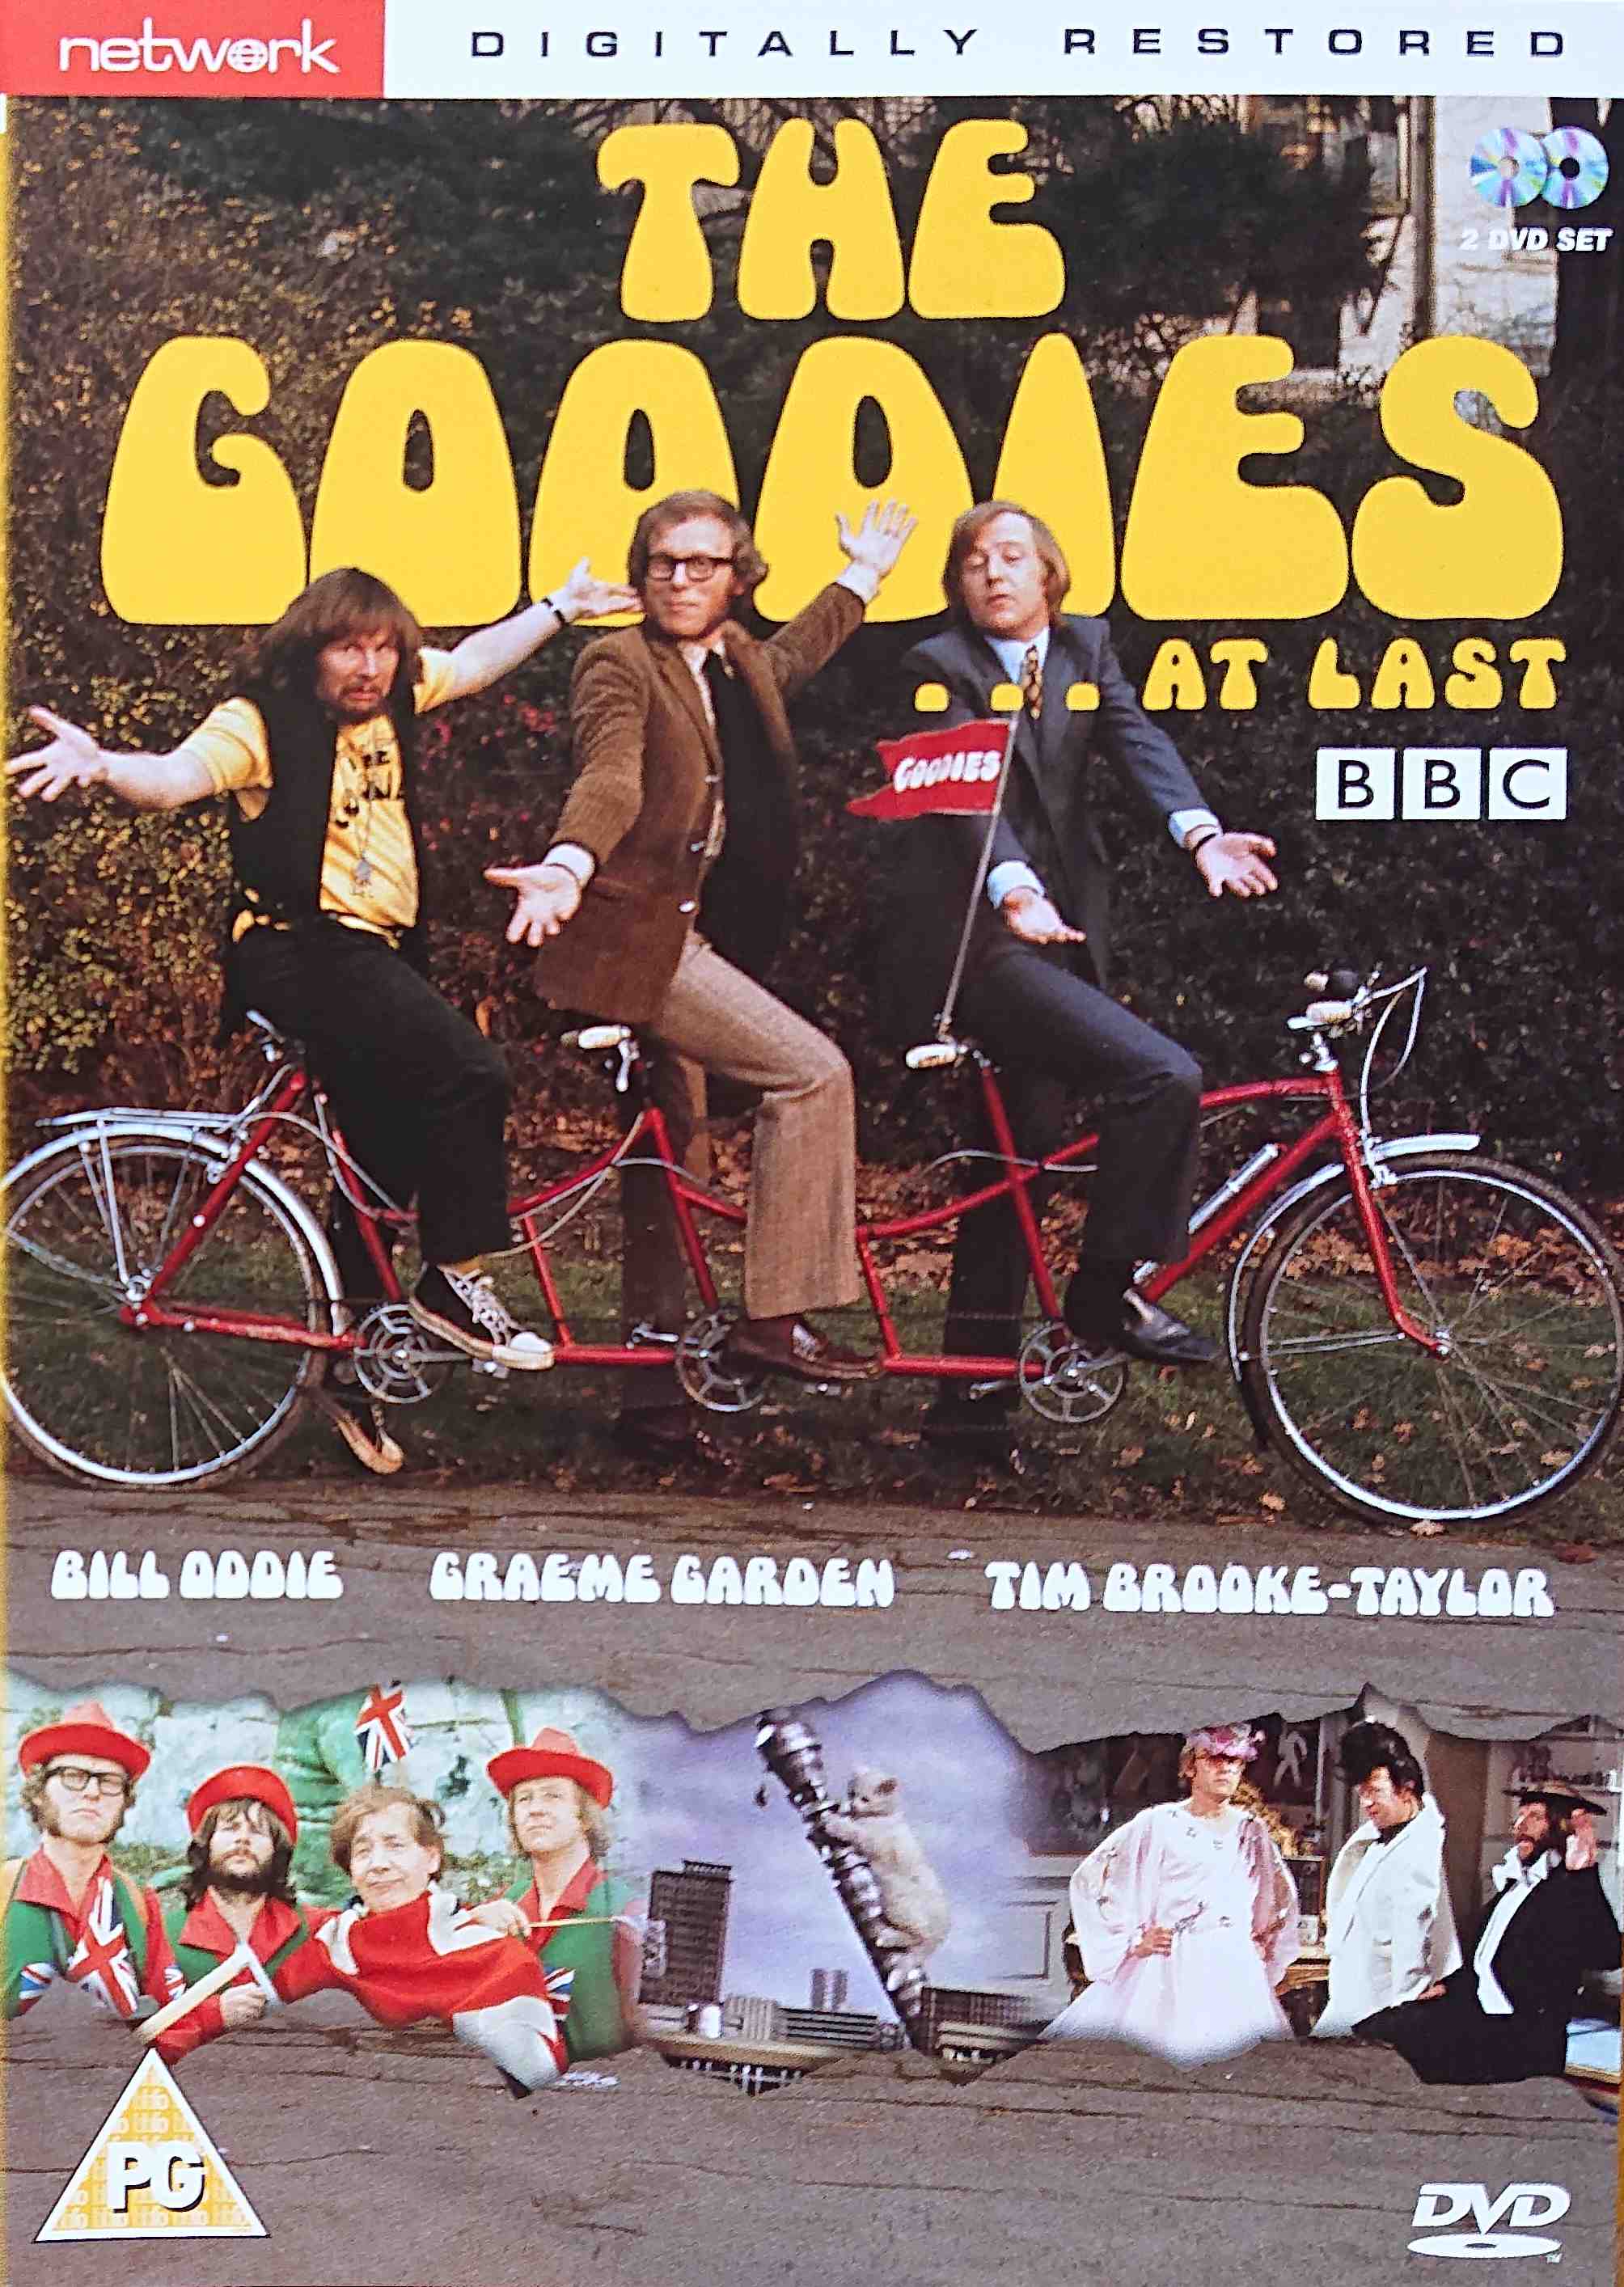 Picture of The Goodies ... at last by artist Bill Oddie / Graeme Garden / Tim Brooke-Taylor from the BBC dvds - Records and Tapes library